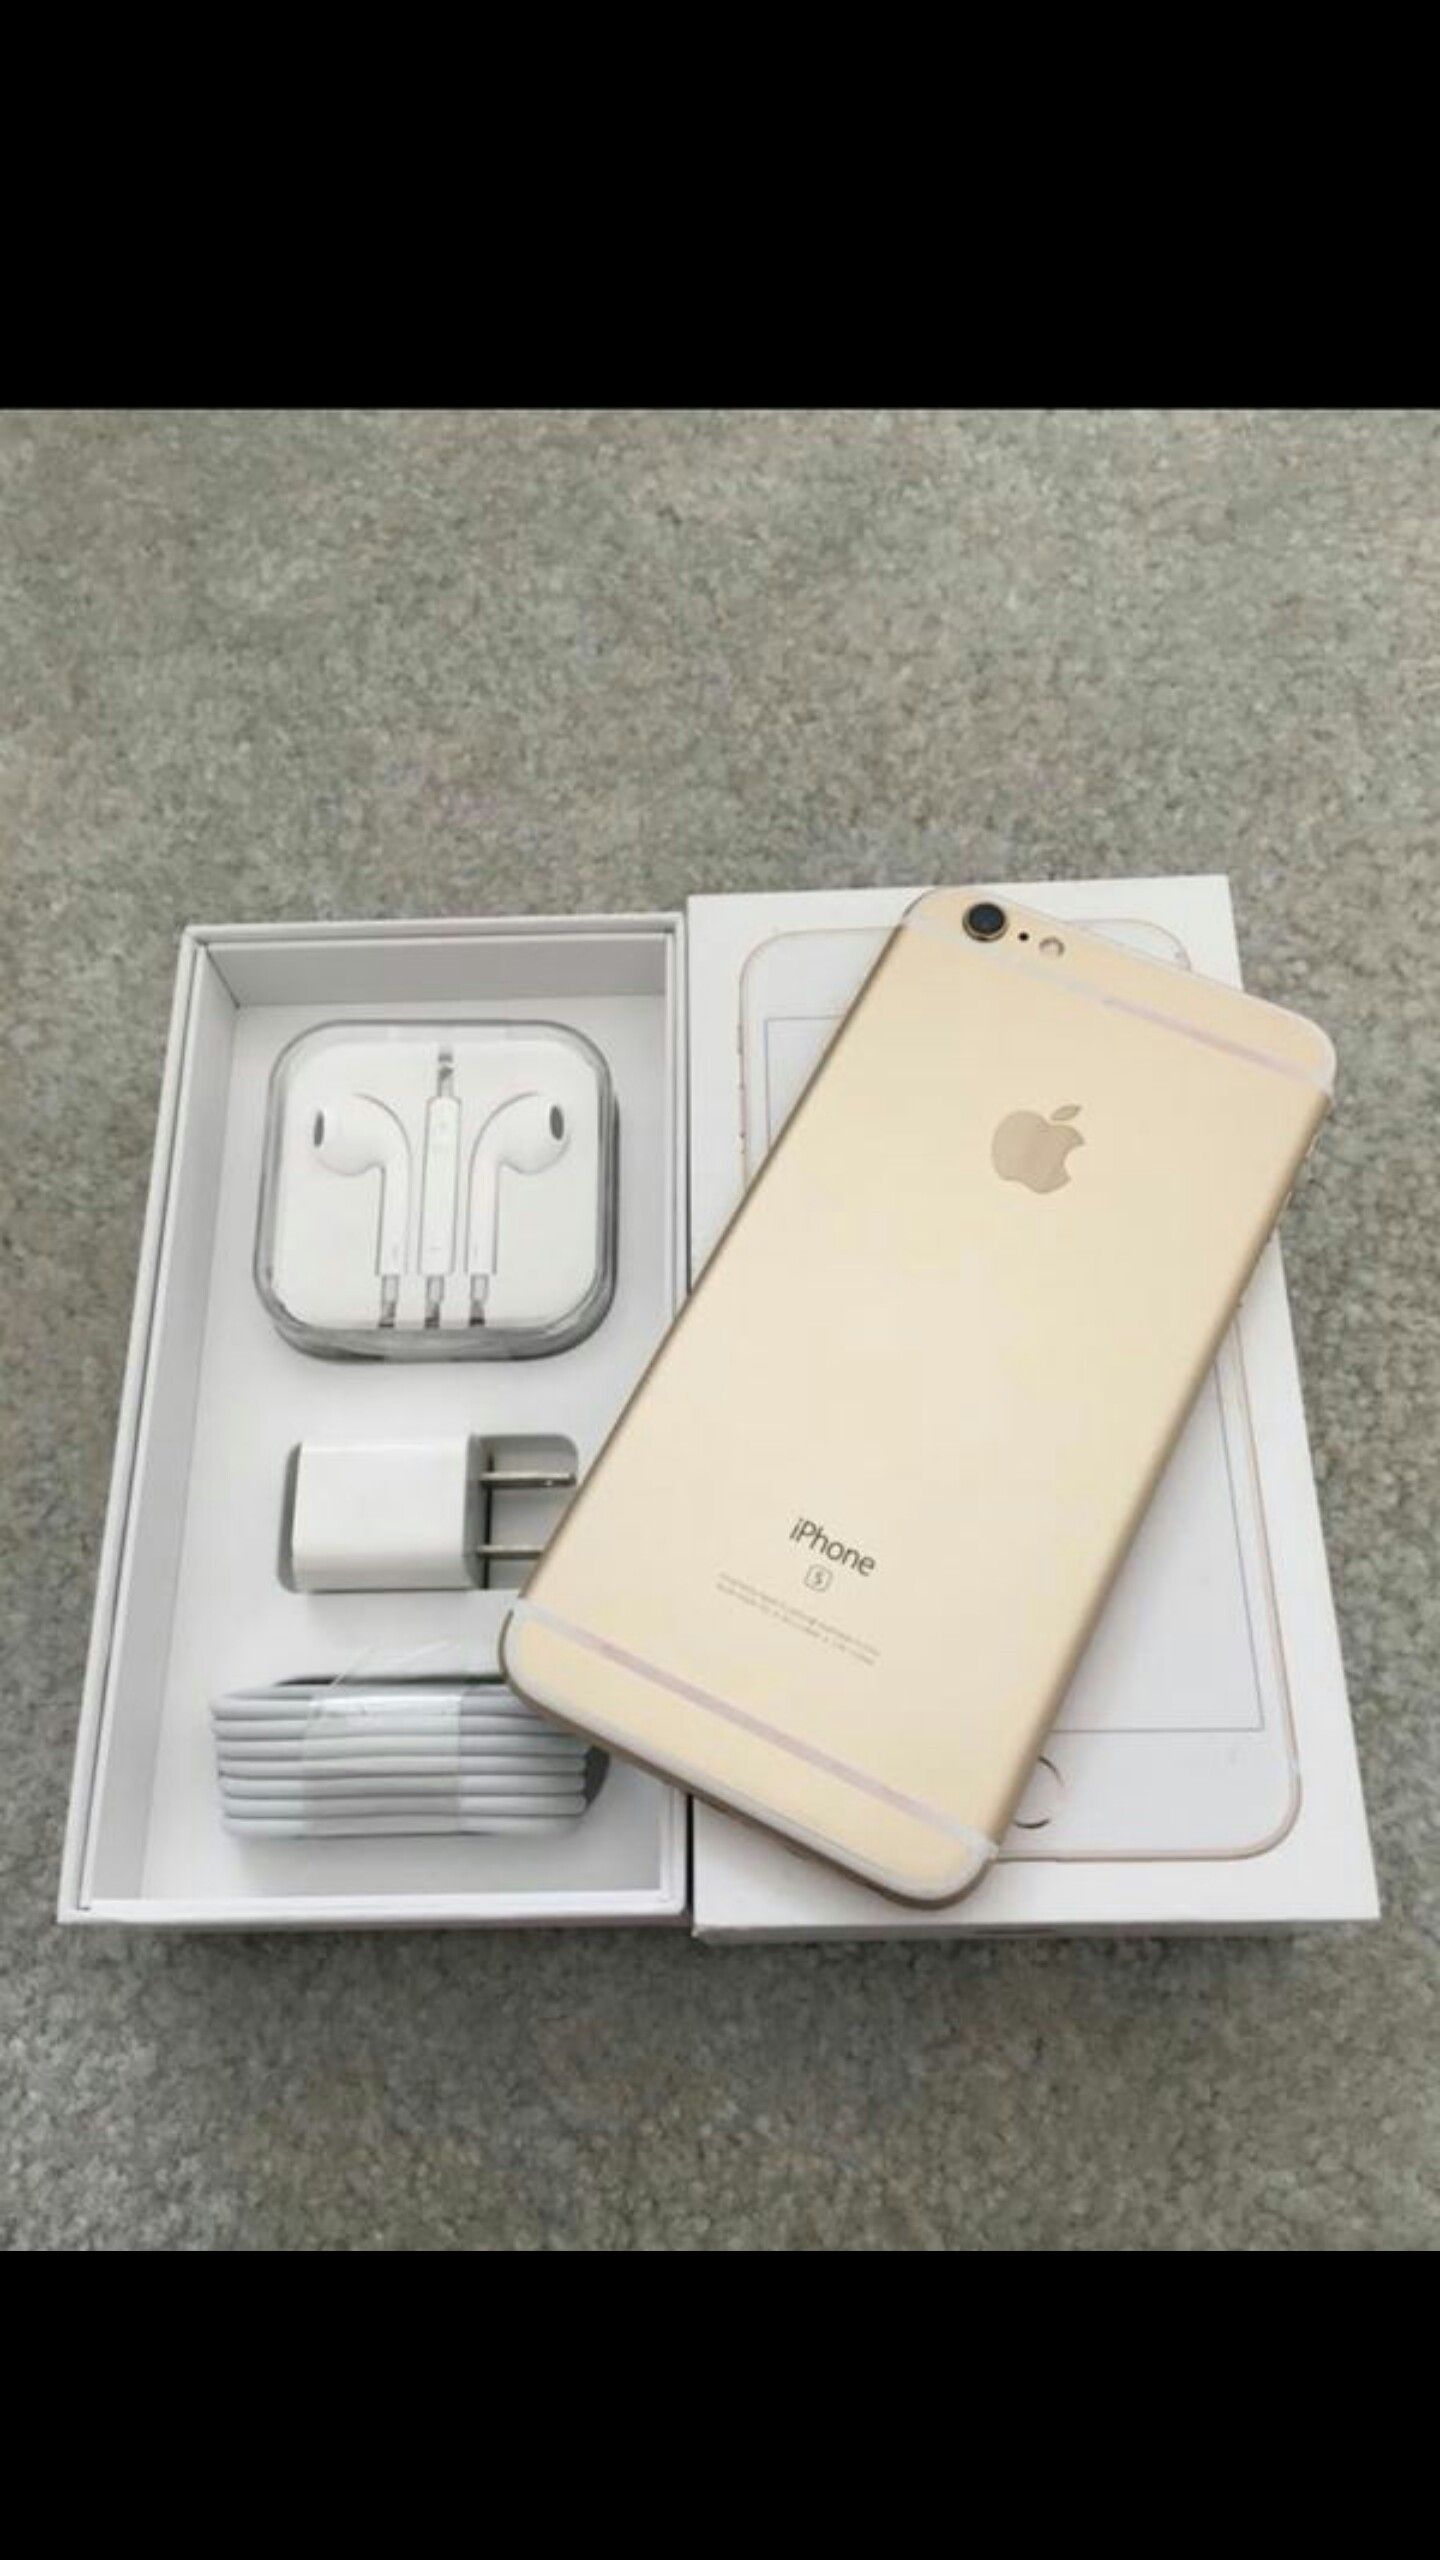 IPhone 6S, 64Gb Factory UNLOCKED//Excellent Condition// As like New//Price is Negotiable